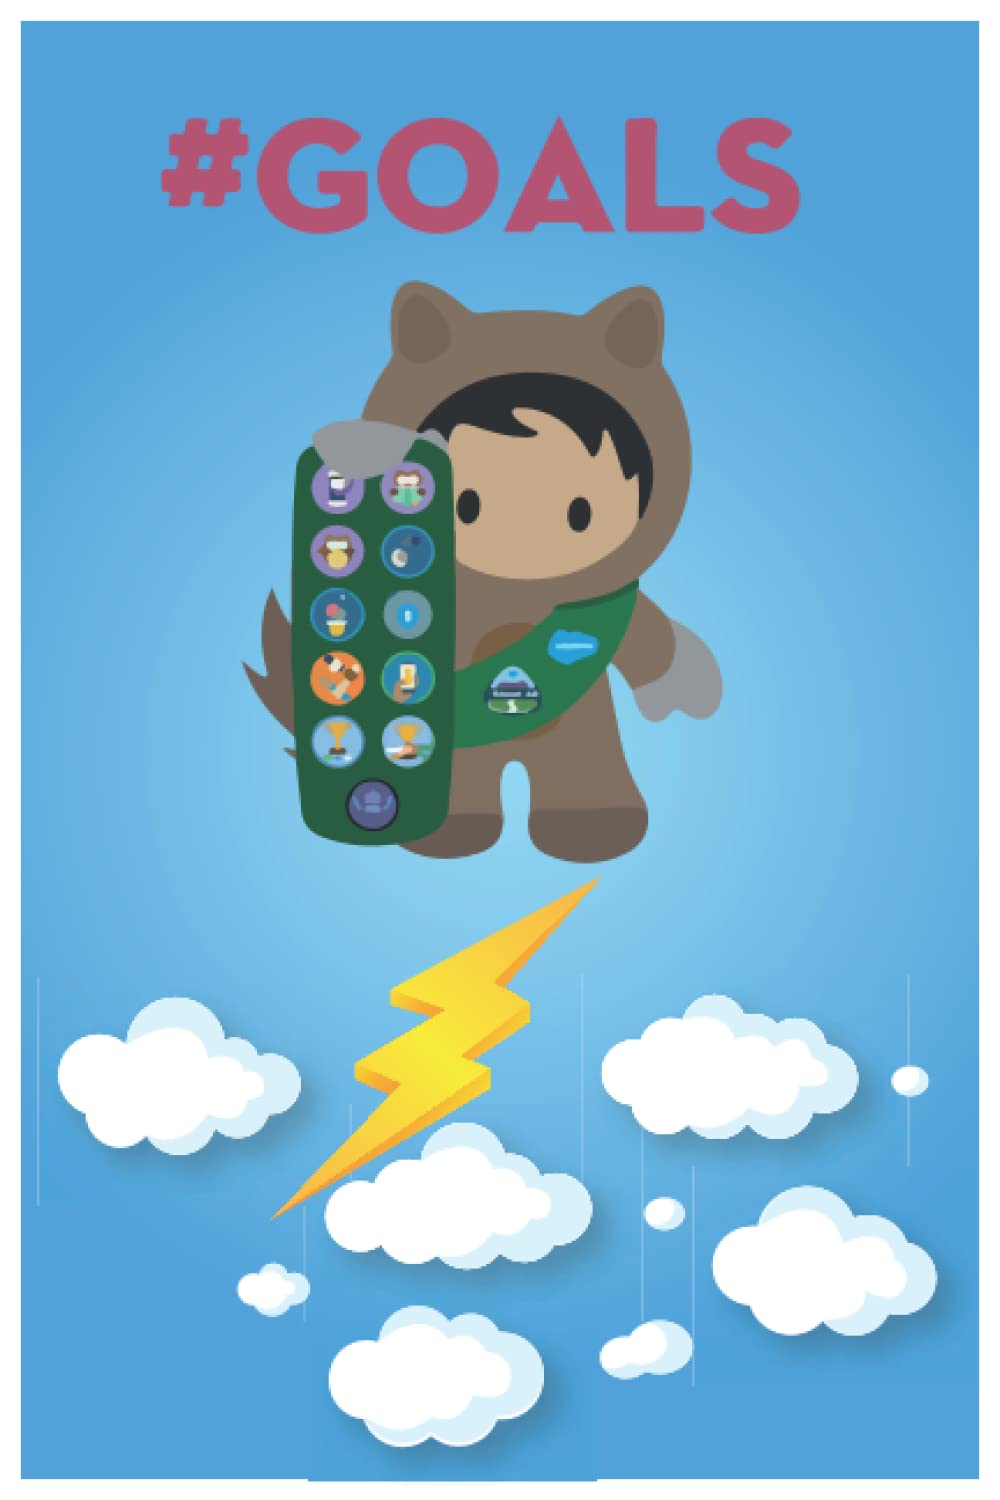 Salesforce Trailblazer Goals Trailhead Ranger: Lined Notebook / Journal Gift, 100 Pages, 6x9, Soft Cover, Matte Finish (Salesforce Funny Notebooks) (French Edition)